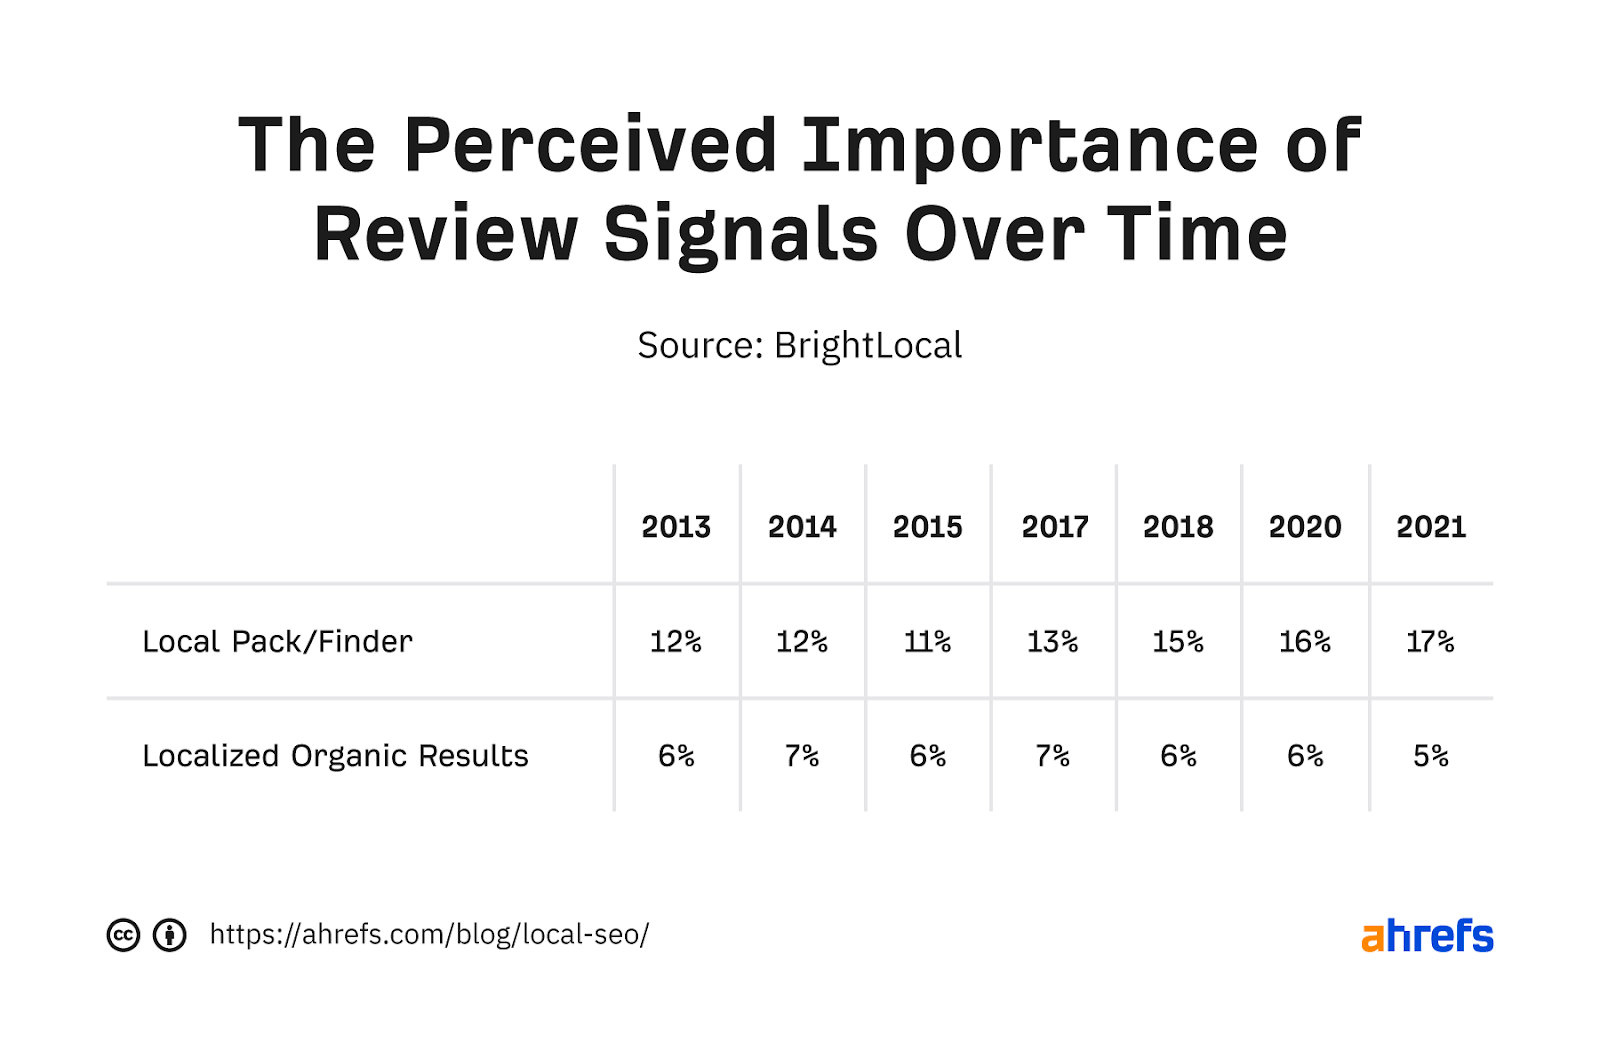 Table showing perceived importance of reviews over time for map pack and "regular" results, respectively 